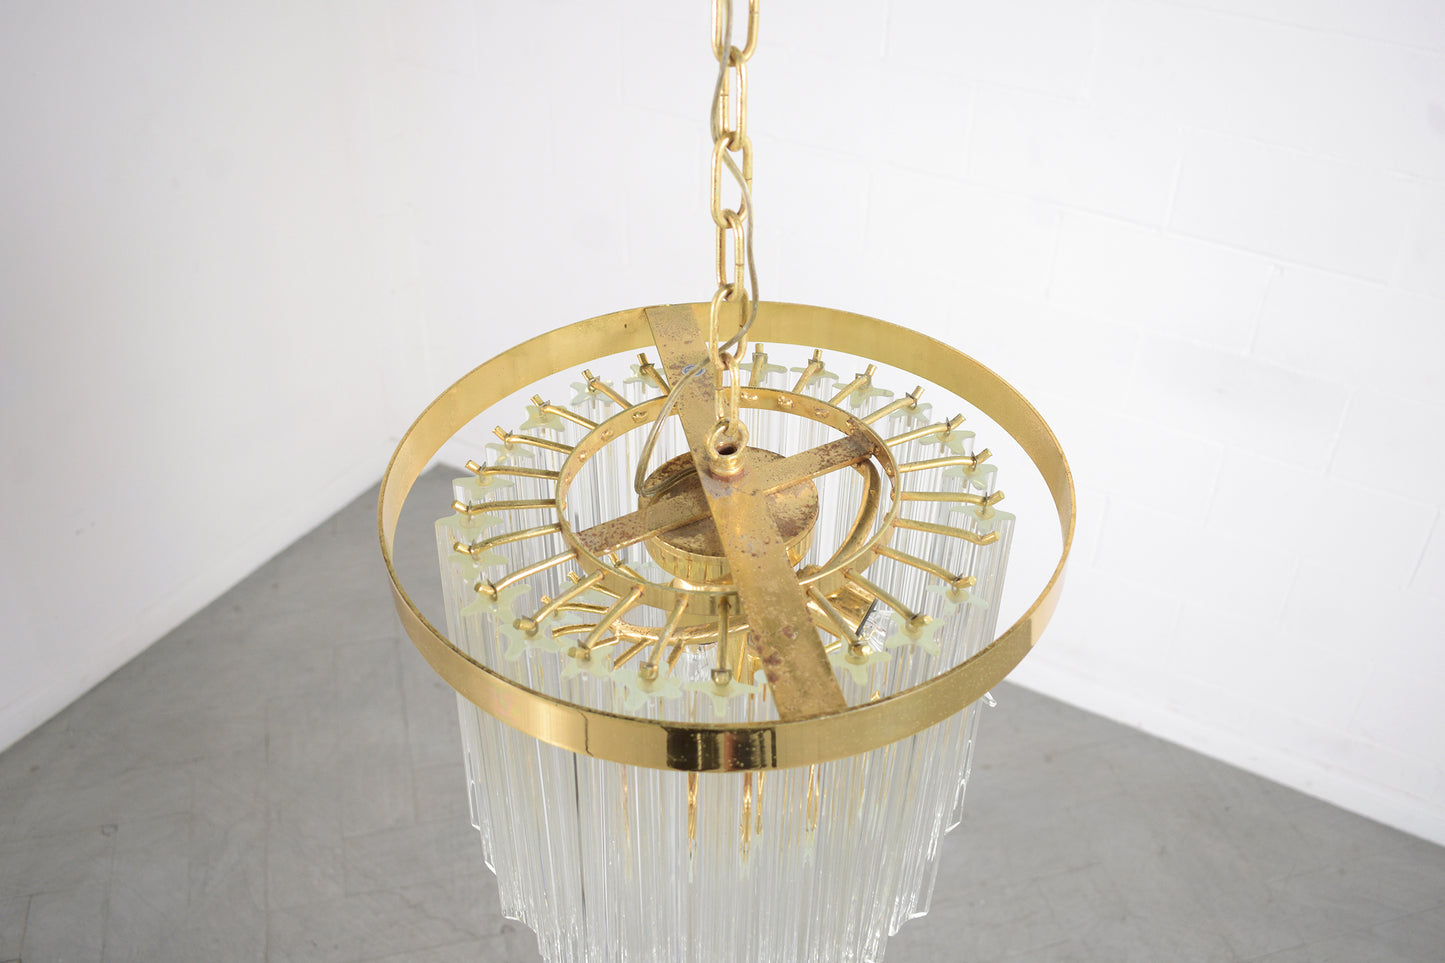 Vintage Drop Pendant Chandeliers: Timeless Elegance in Brass and Glass